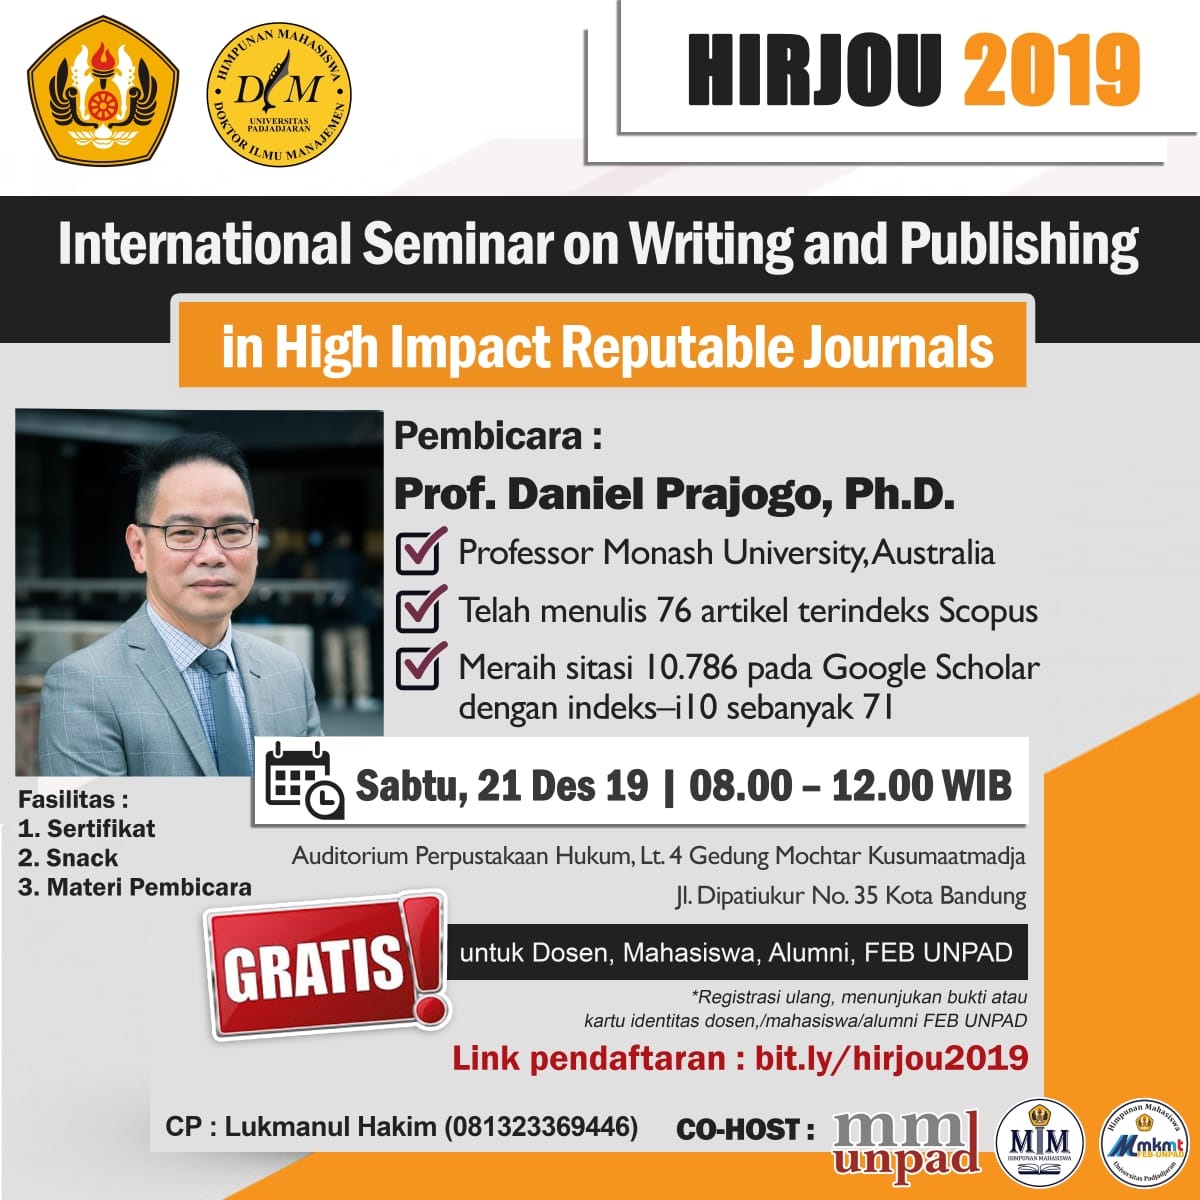 International Seminar on Writing and Publishing in High